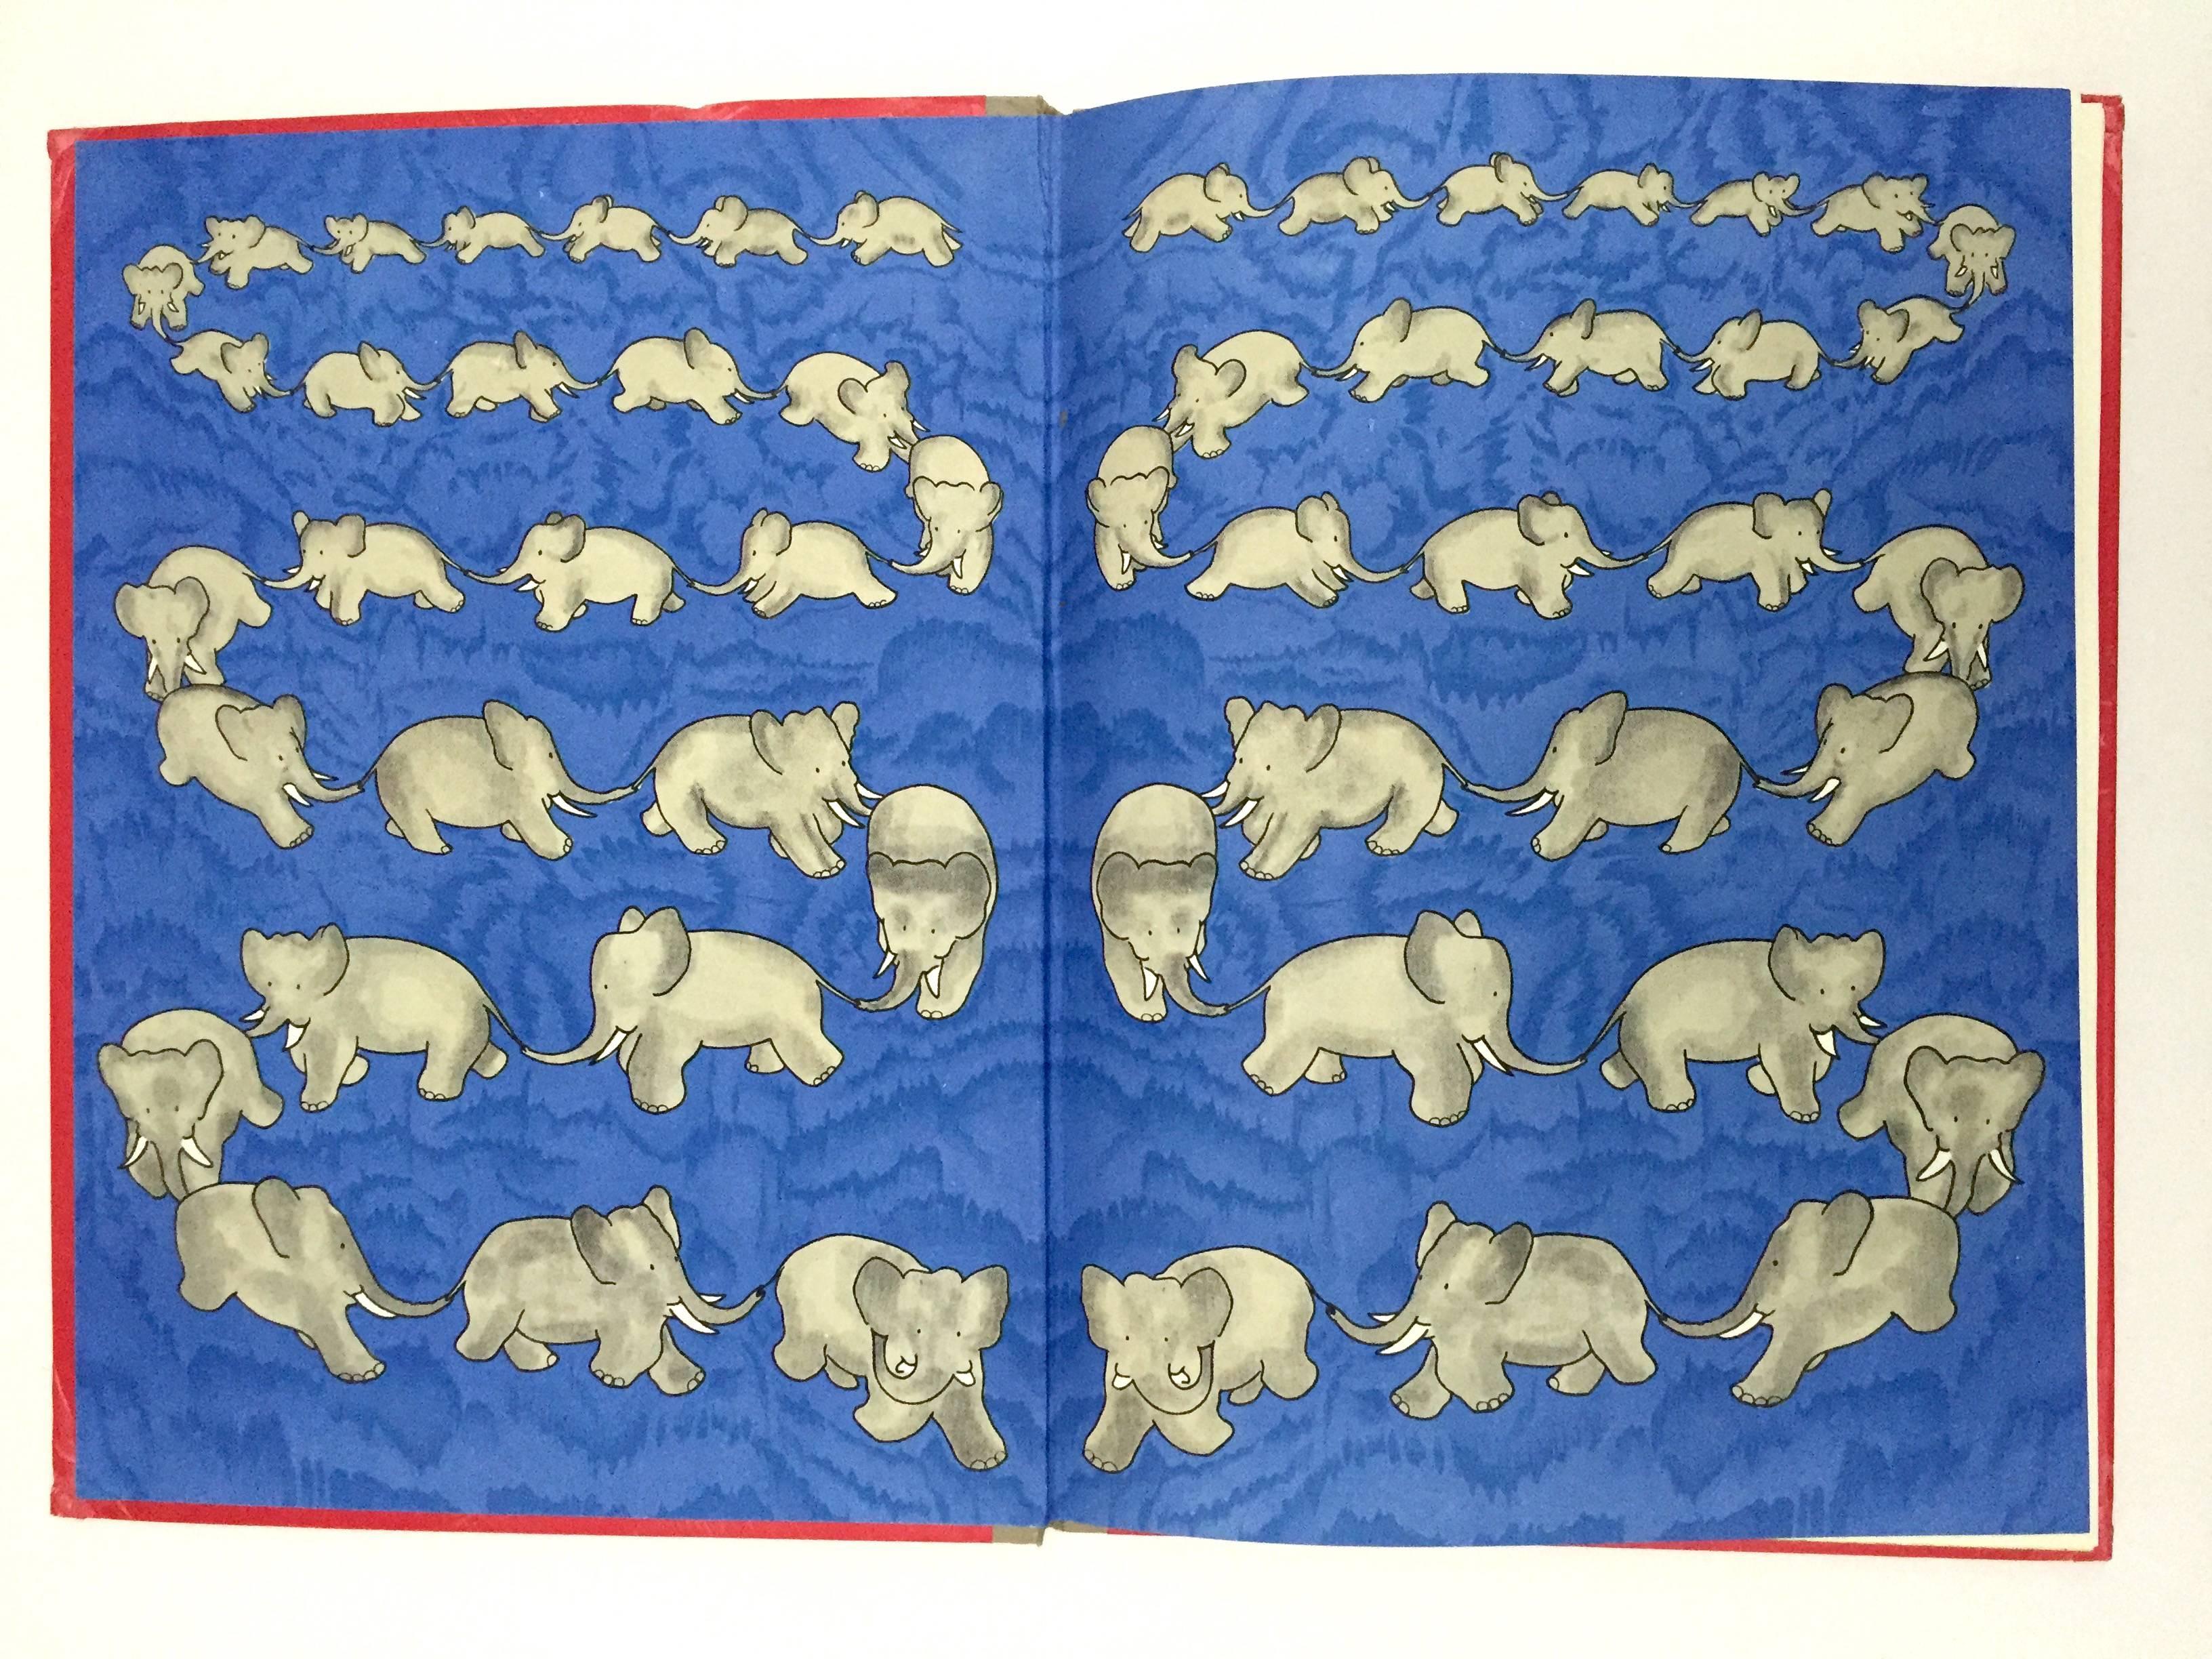 Published by Hachette, 1938.

Babar the elephant is undoubtedly one of the worlds' most loved children's book characters and some say a characterization of Brunhoff himself. This is the first Hachette edition of 'Babar en Famille', an endearing